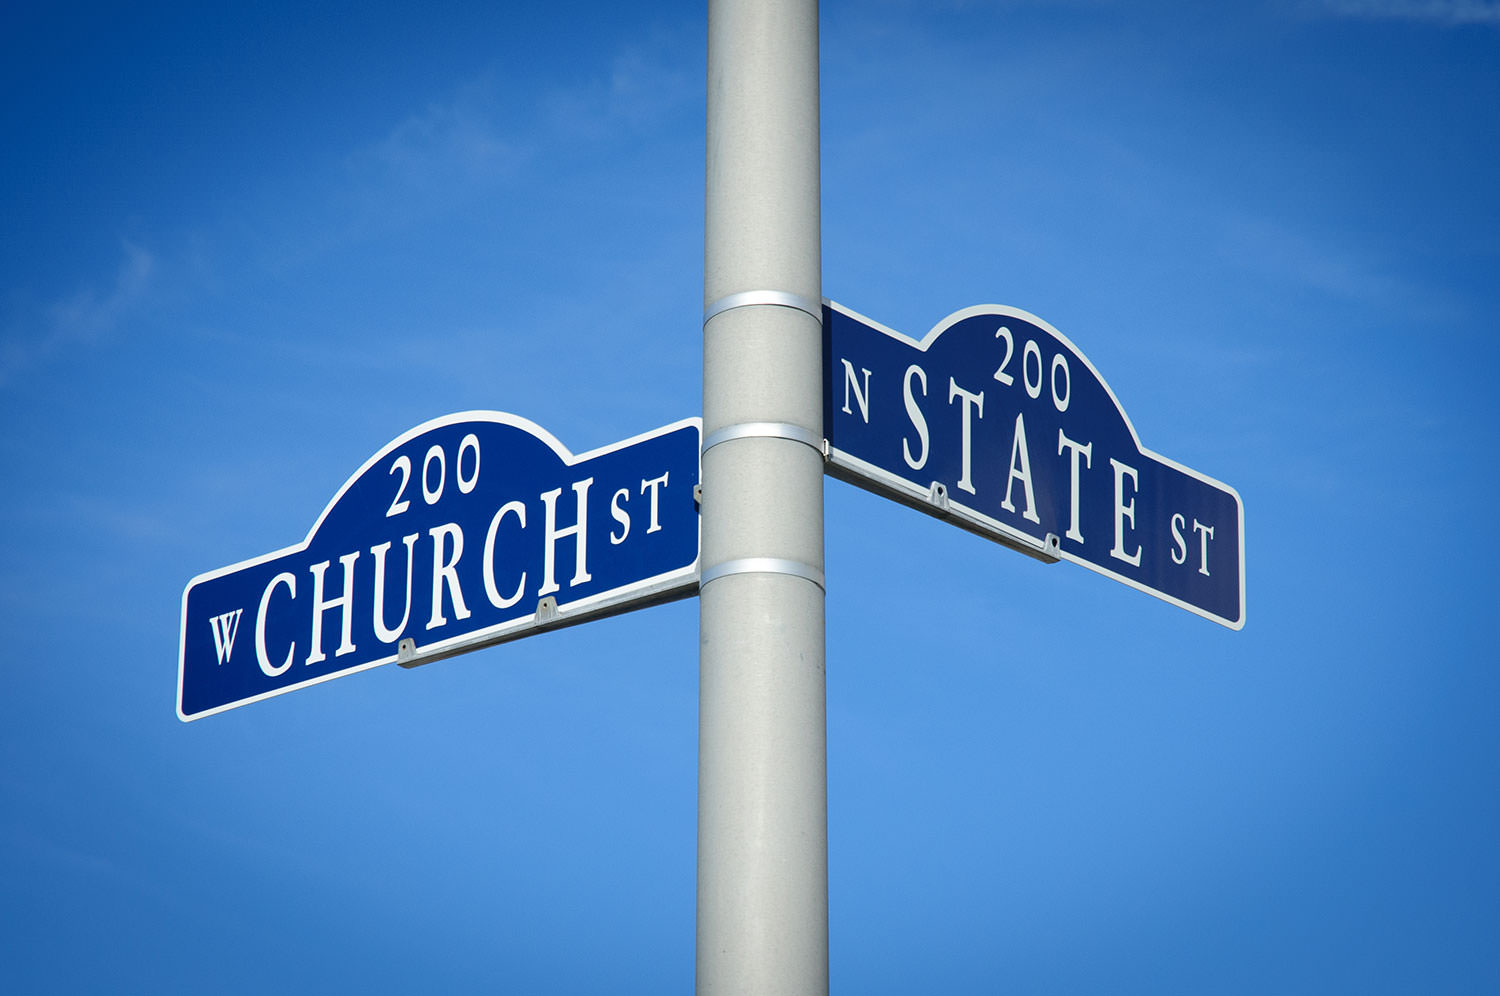 Street signs on a pole stating Church and State.